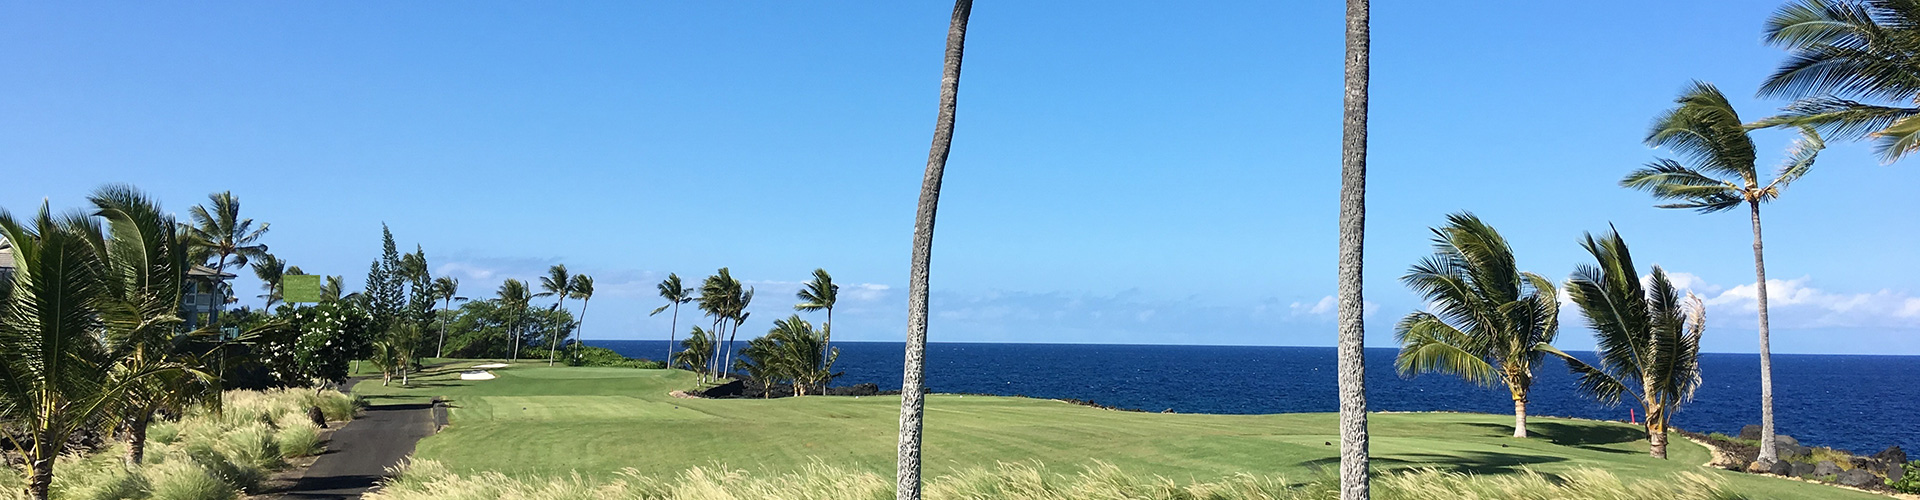 view of golf course green and palm trees